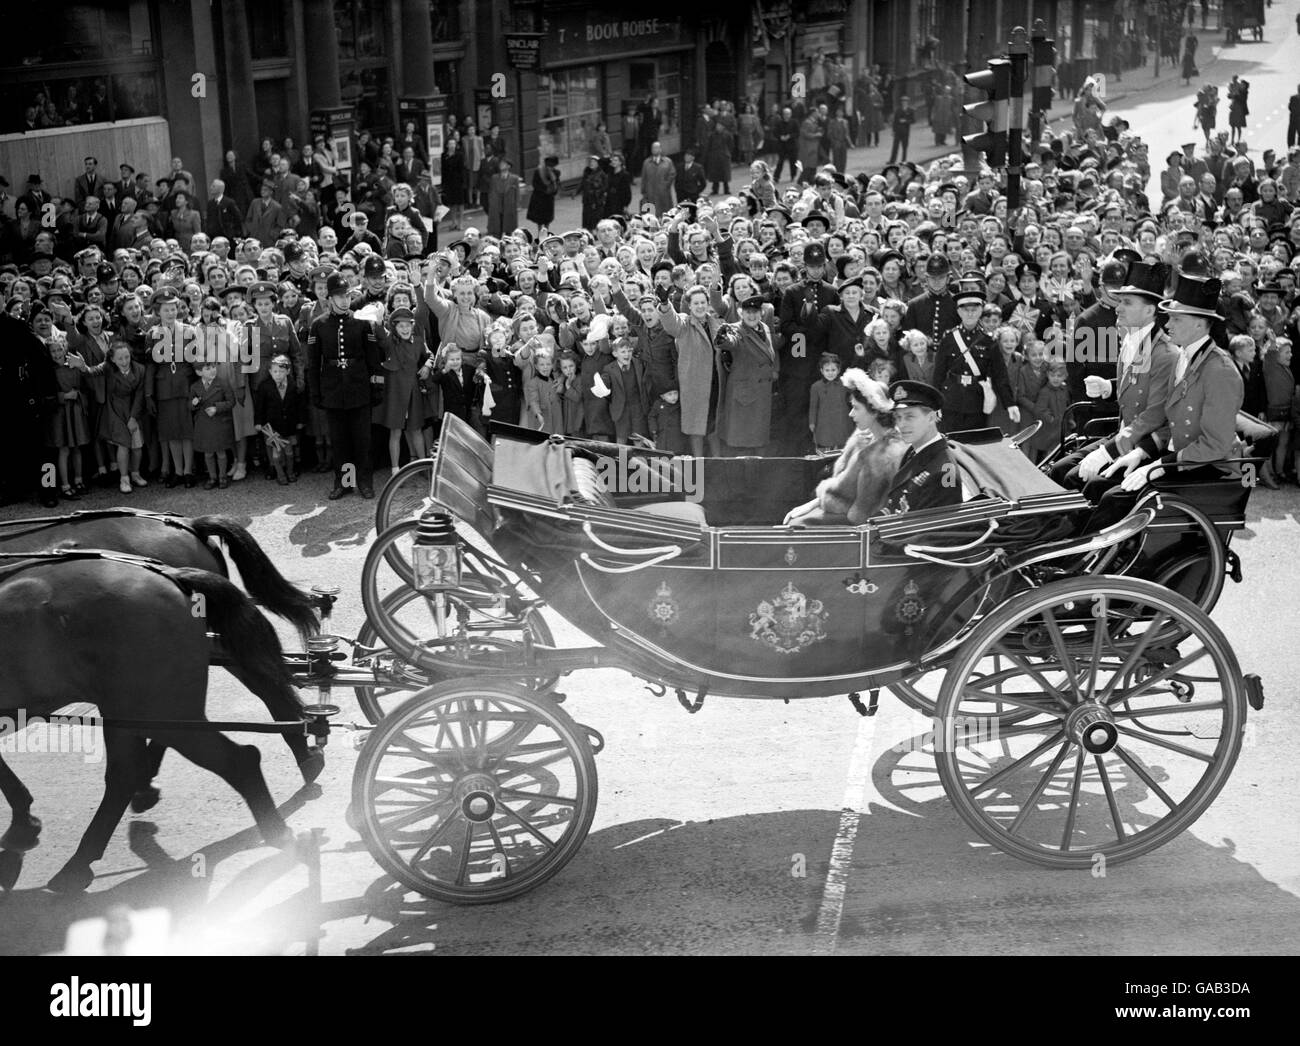 Princess Elizabeth and the Duke of Edinburgh passing through Trafalgar Square, on their way to St Paul's Cathedral for the Silver Wedding Thanksgiving Service for King George VI and Queen Elizabeth. Stock Photo